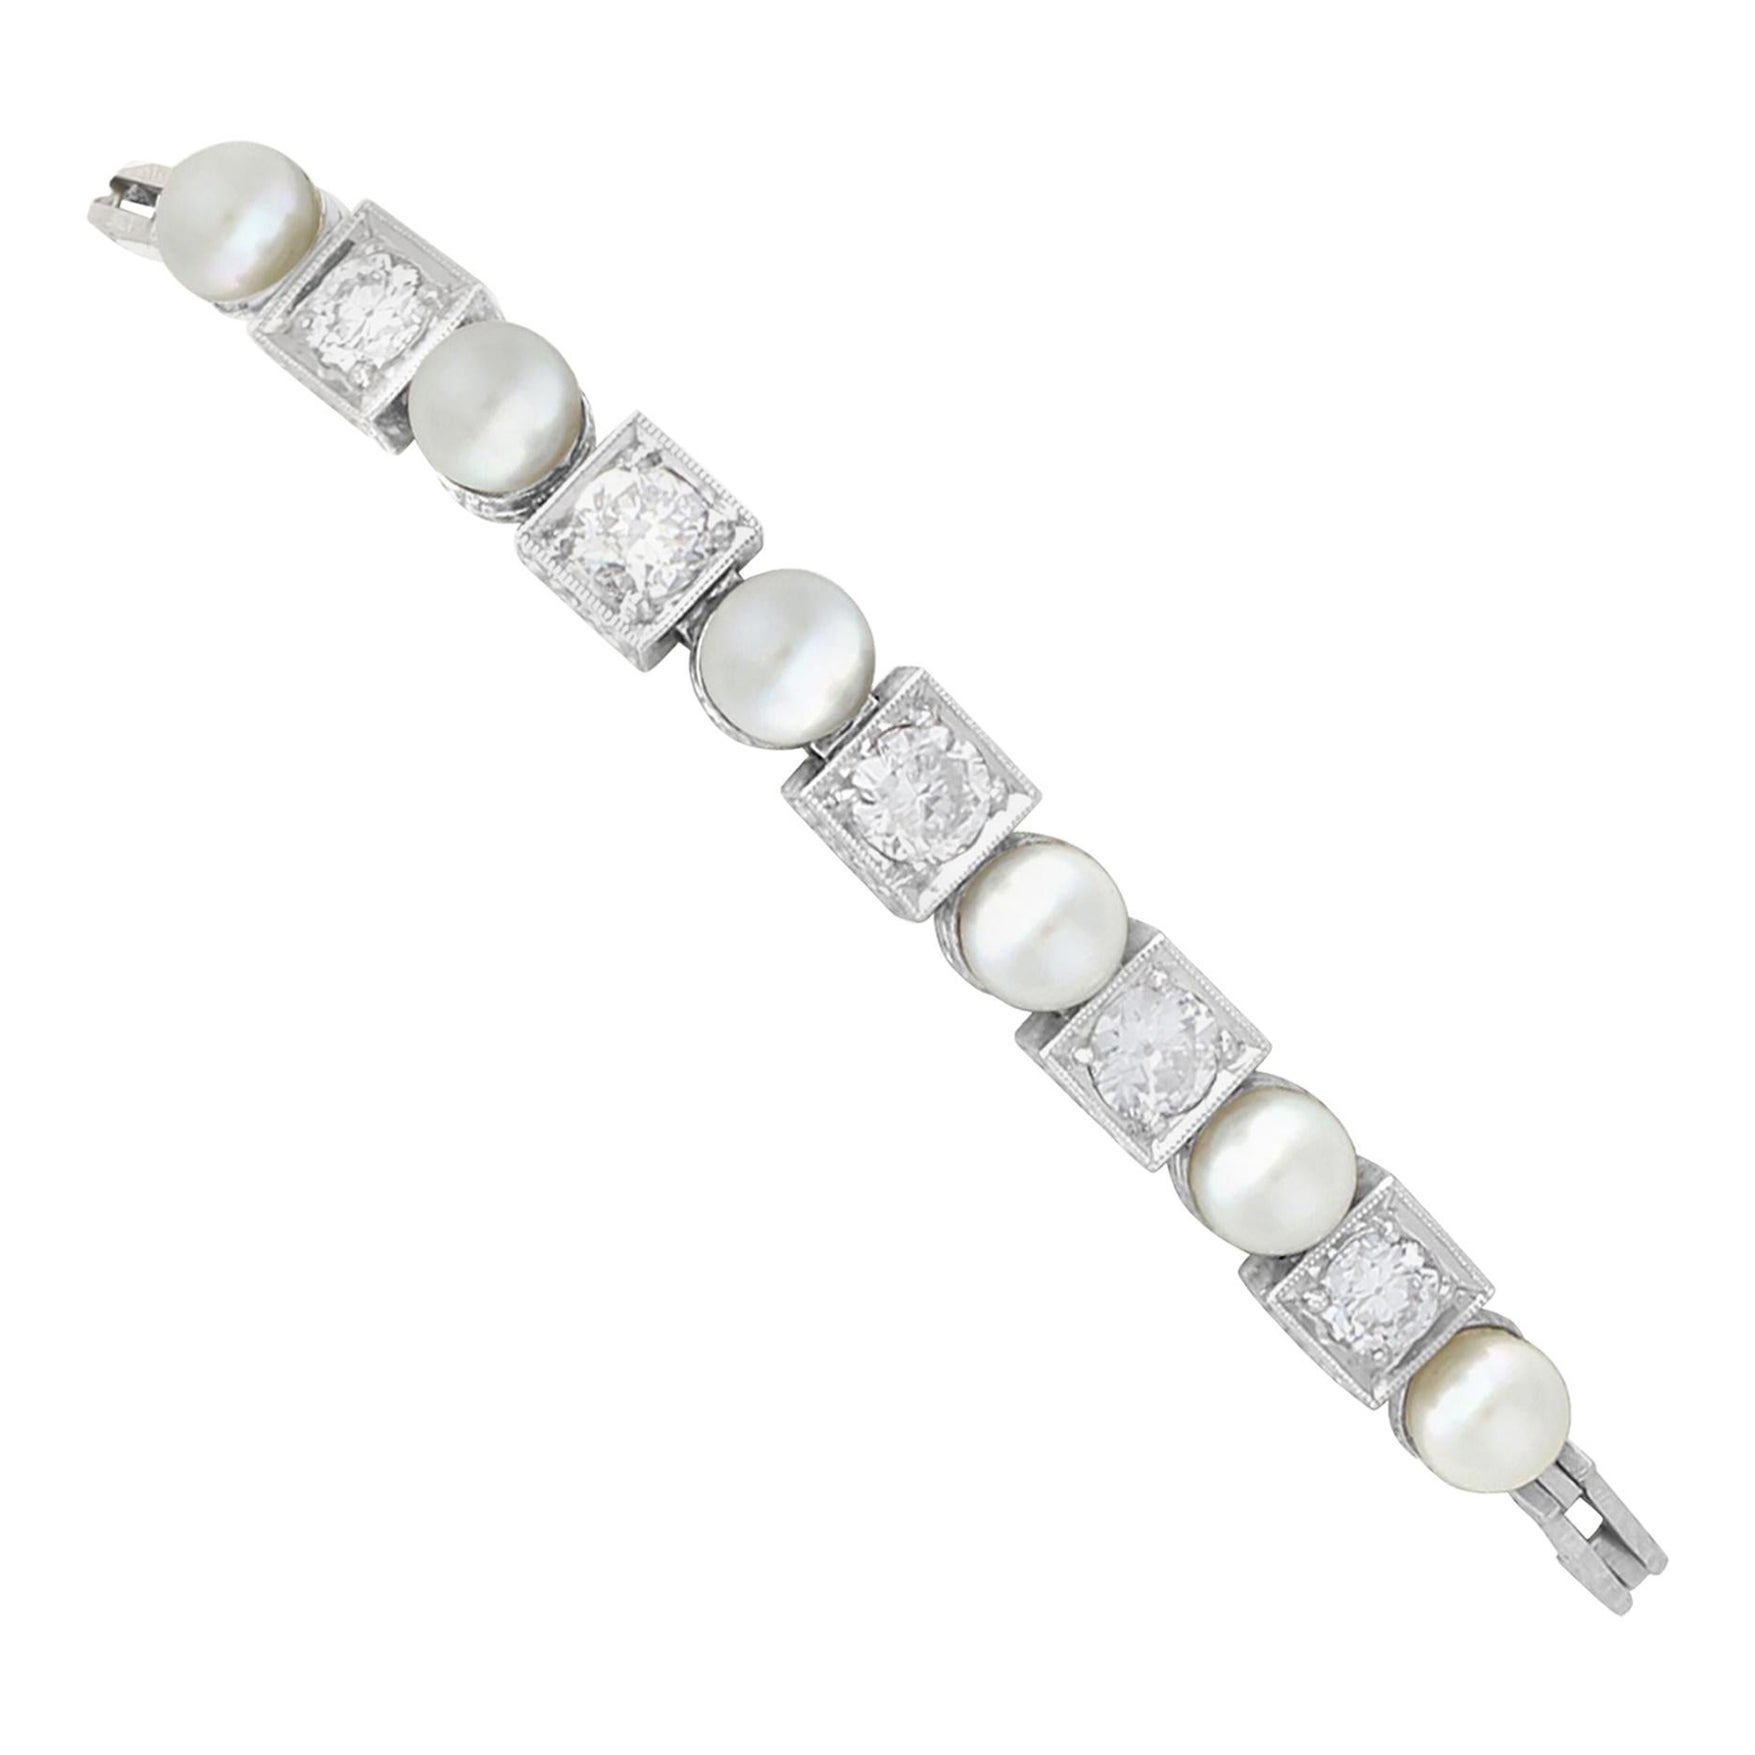 1930s Antique 1.38 Carat Diamond and Cultured Pearl White Gold Bracelet